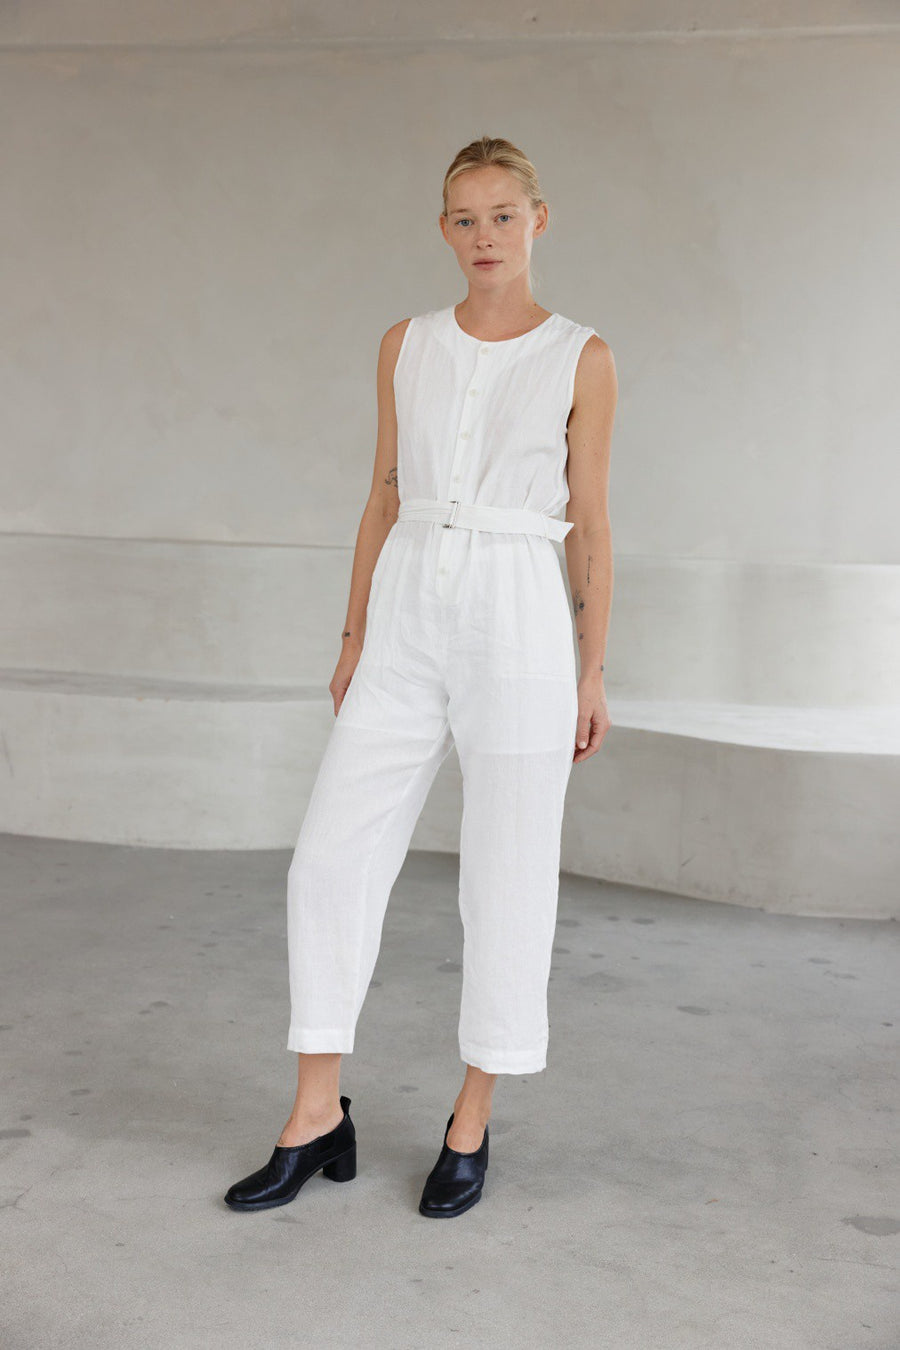 Featuring a linen jumpsuit with a crew neckline, front button detailing and a belt attached